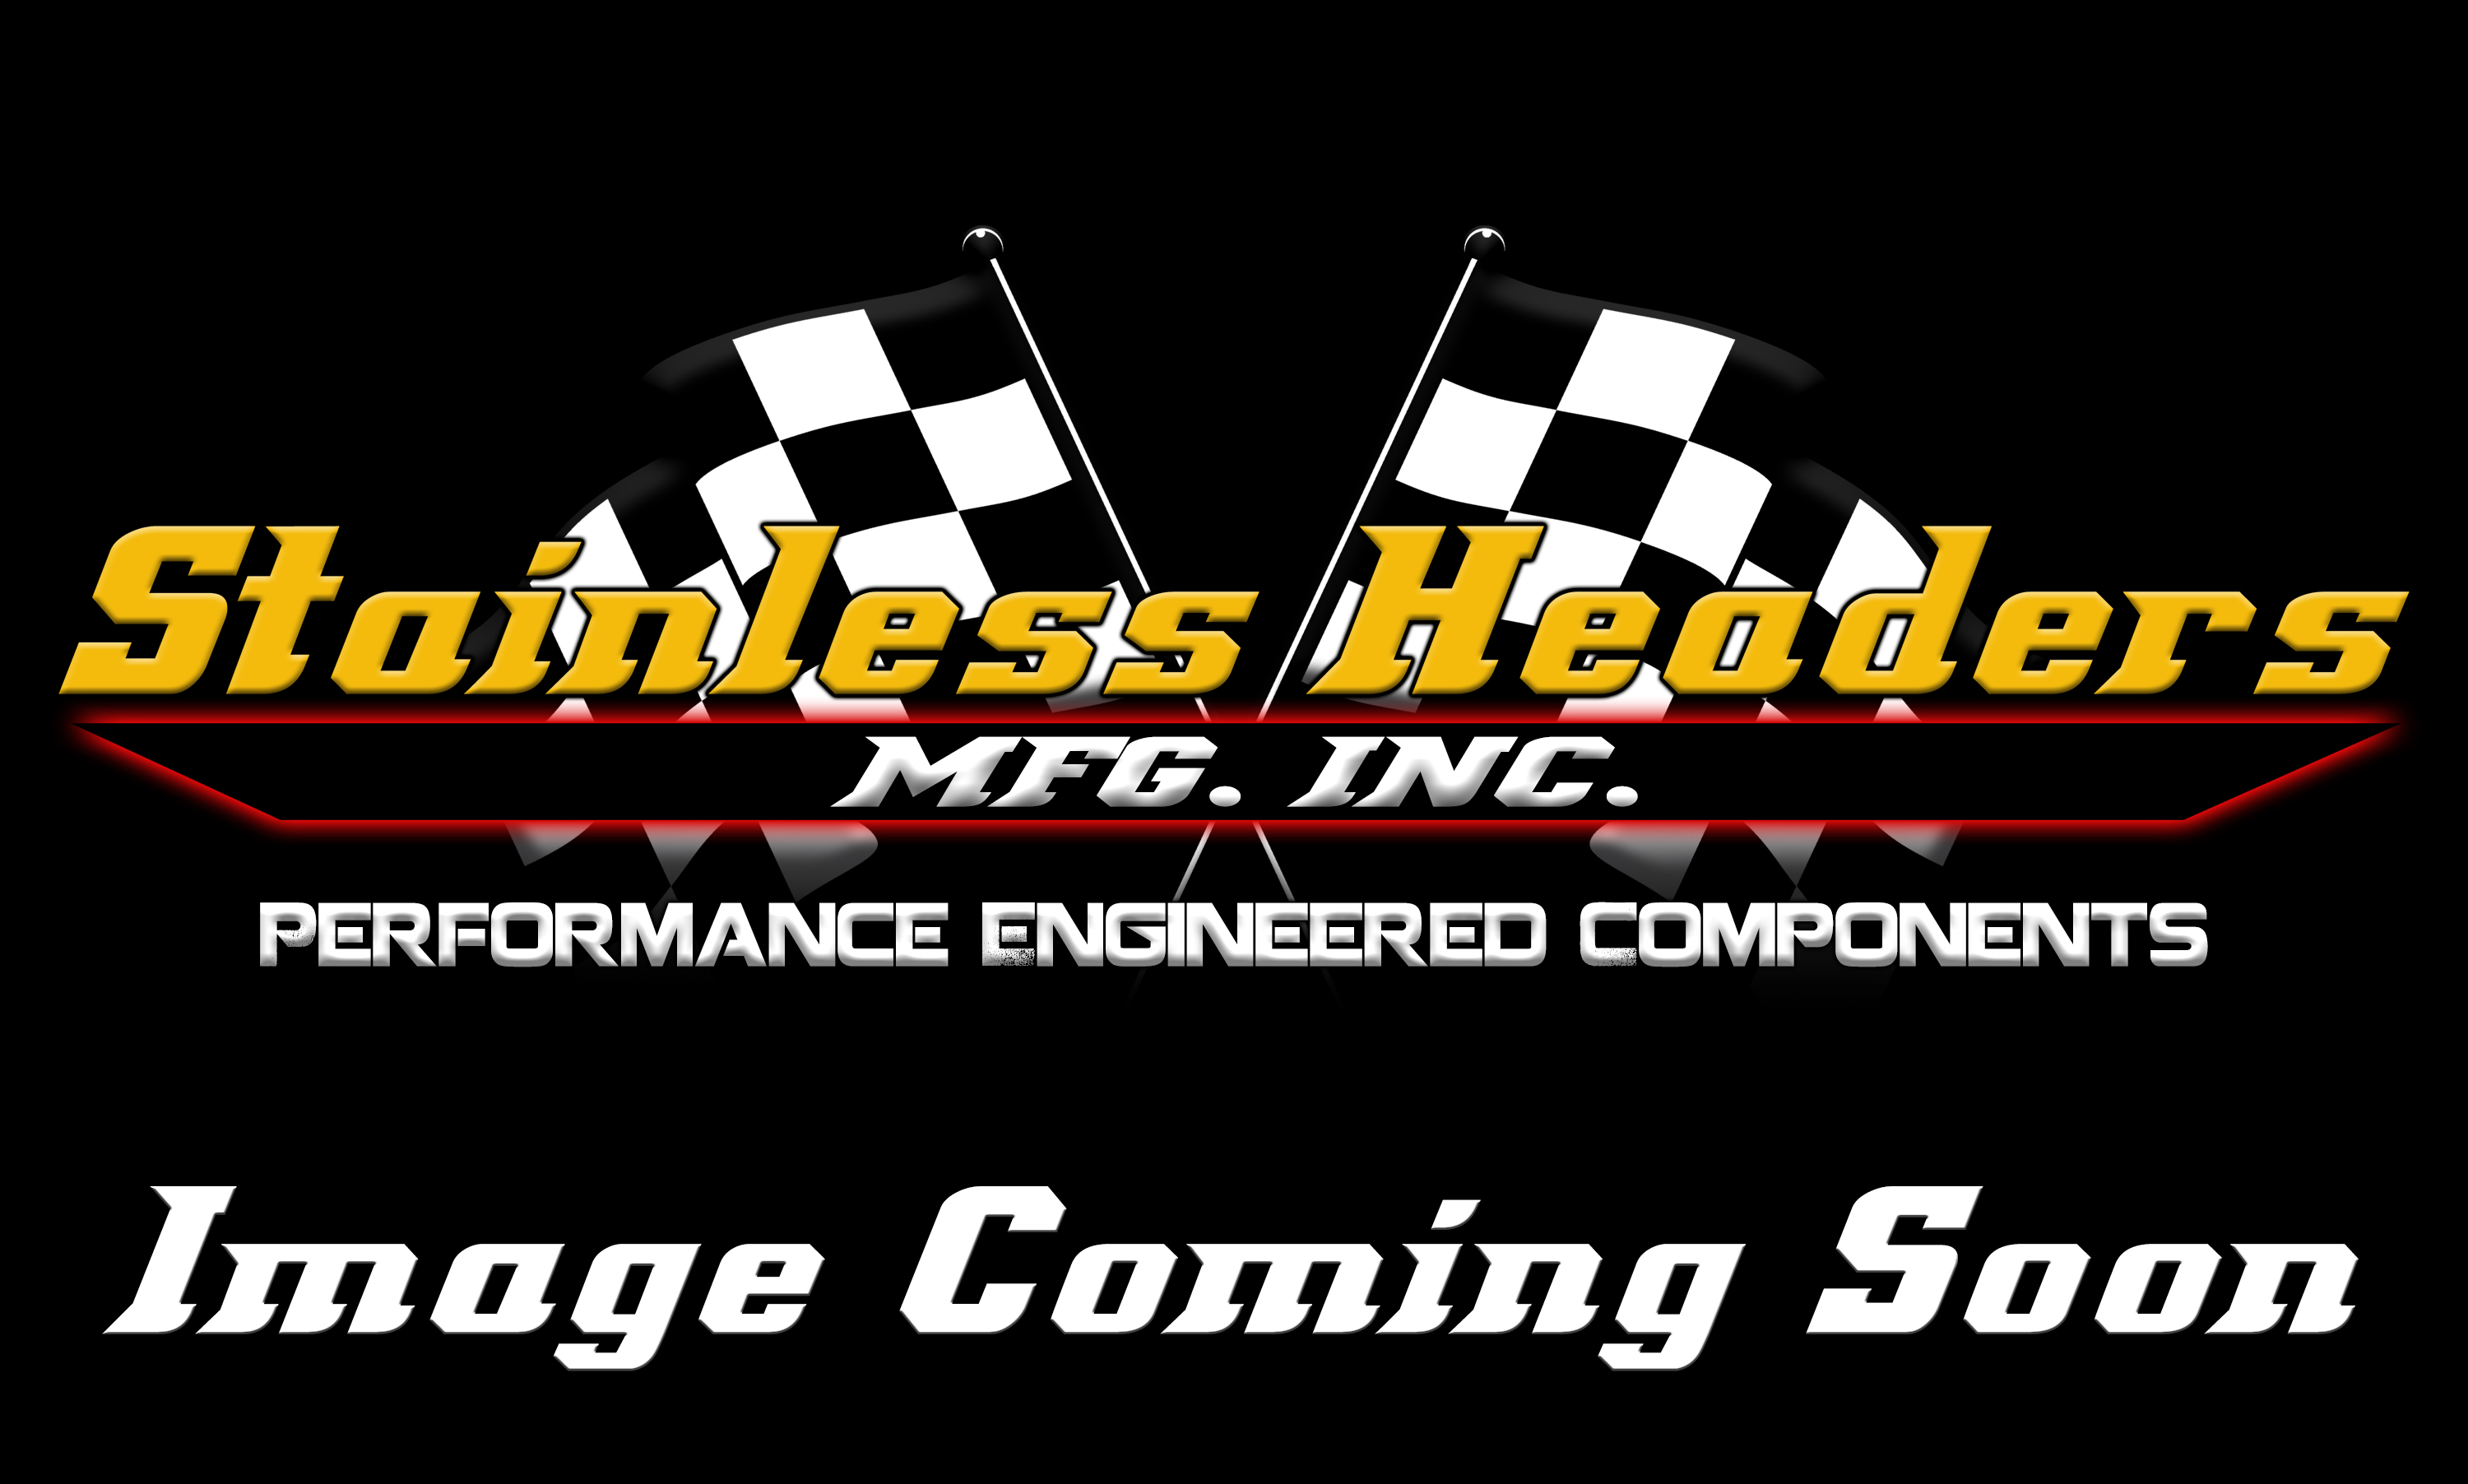 CompTurbo Technologies - CTR4518R-8388 Mid Frame Oil Lubricated 2.0 Turbocharger (1500 HP) - Image 1